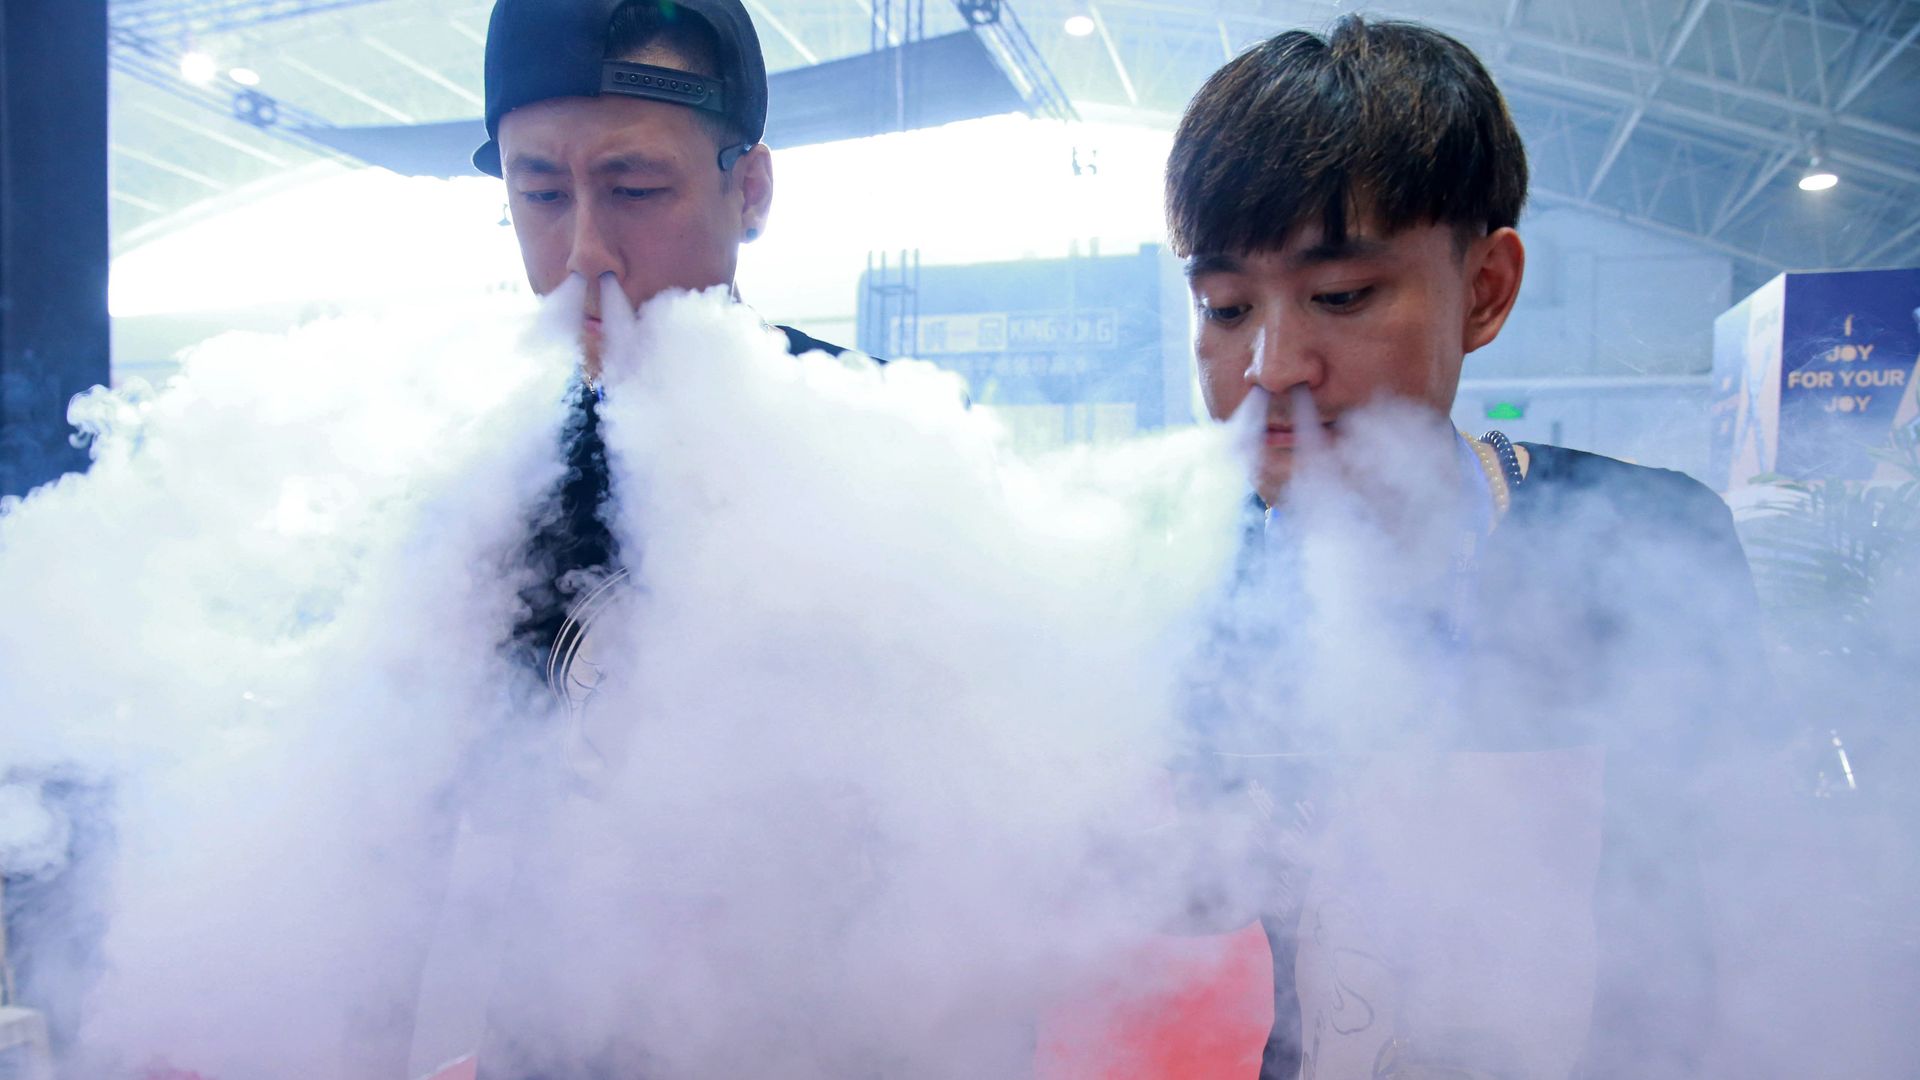 Two people at a Chinese expo showing how to vape, with lots of smoke coming out of their noses